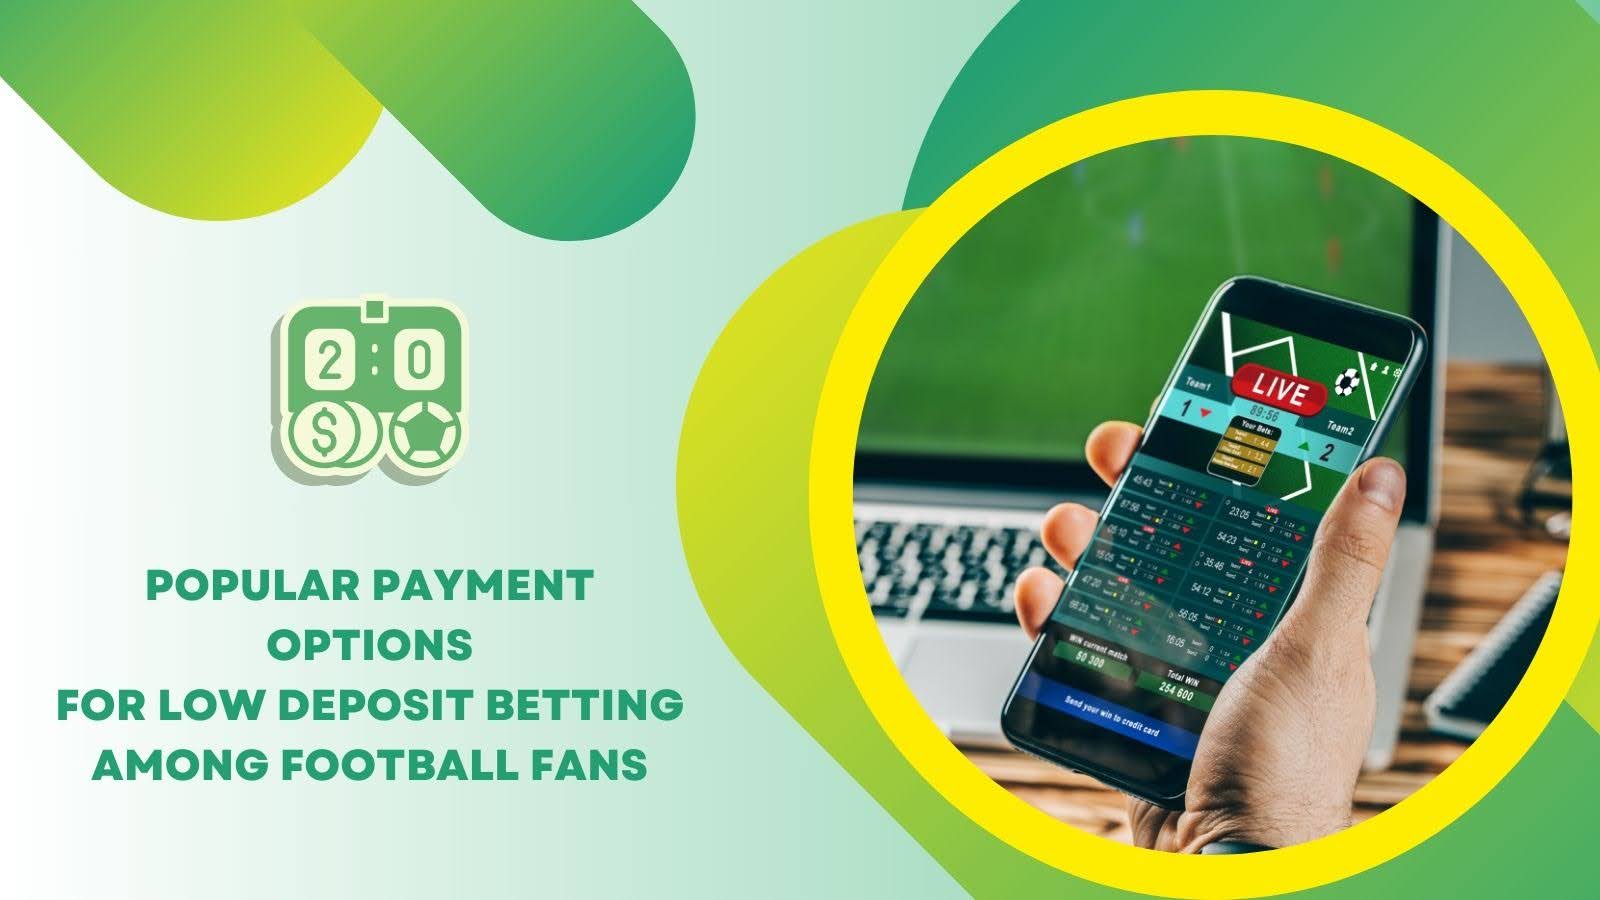 Popular Payment Options for Low Deposit Betting Among Football Fans